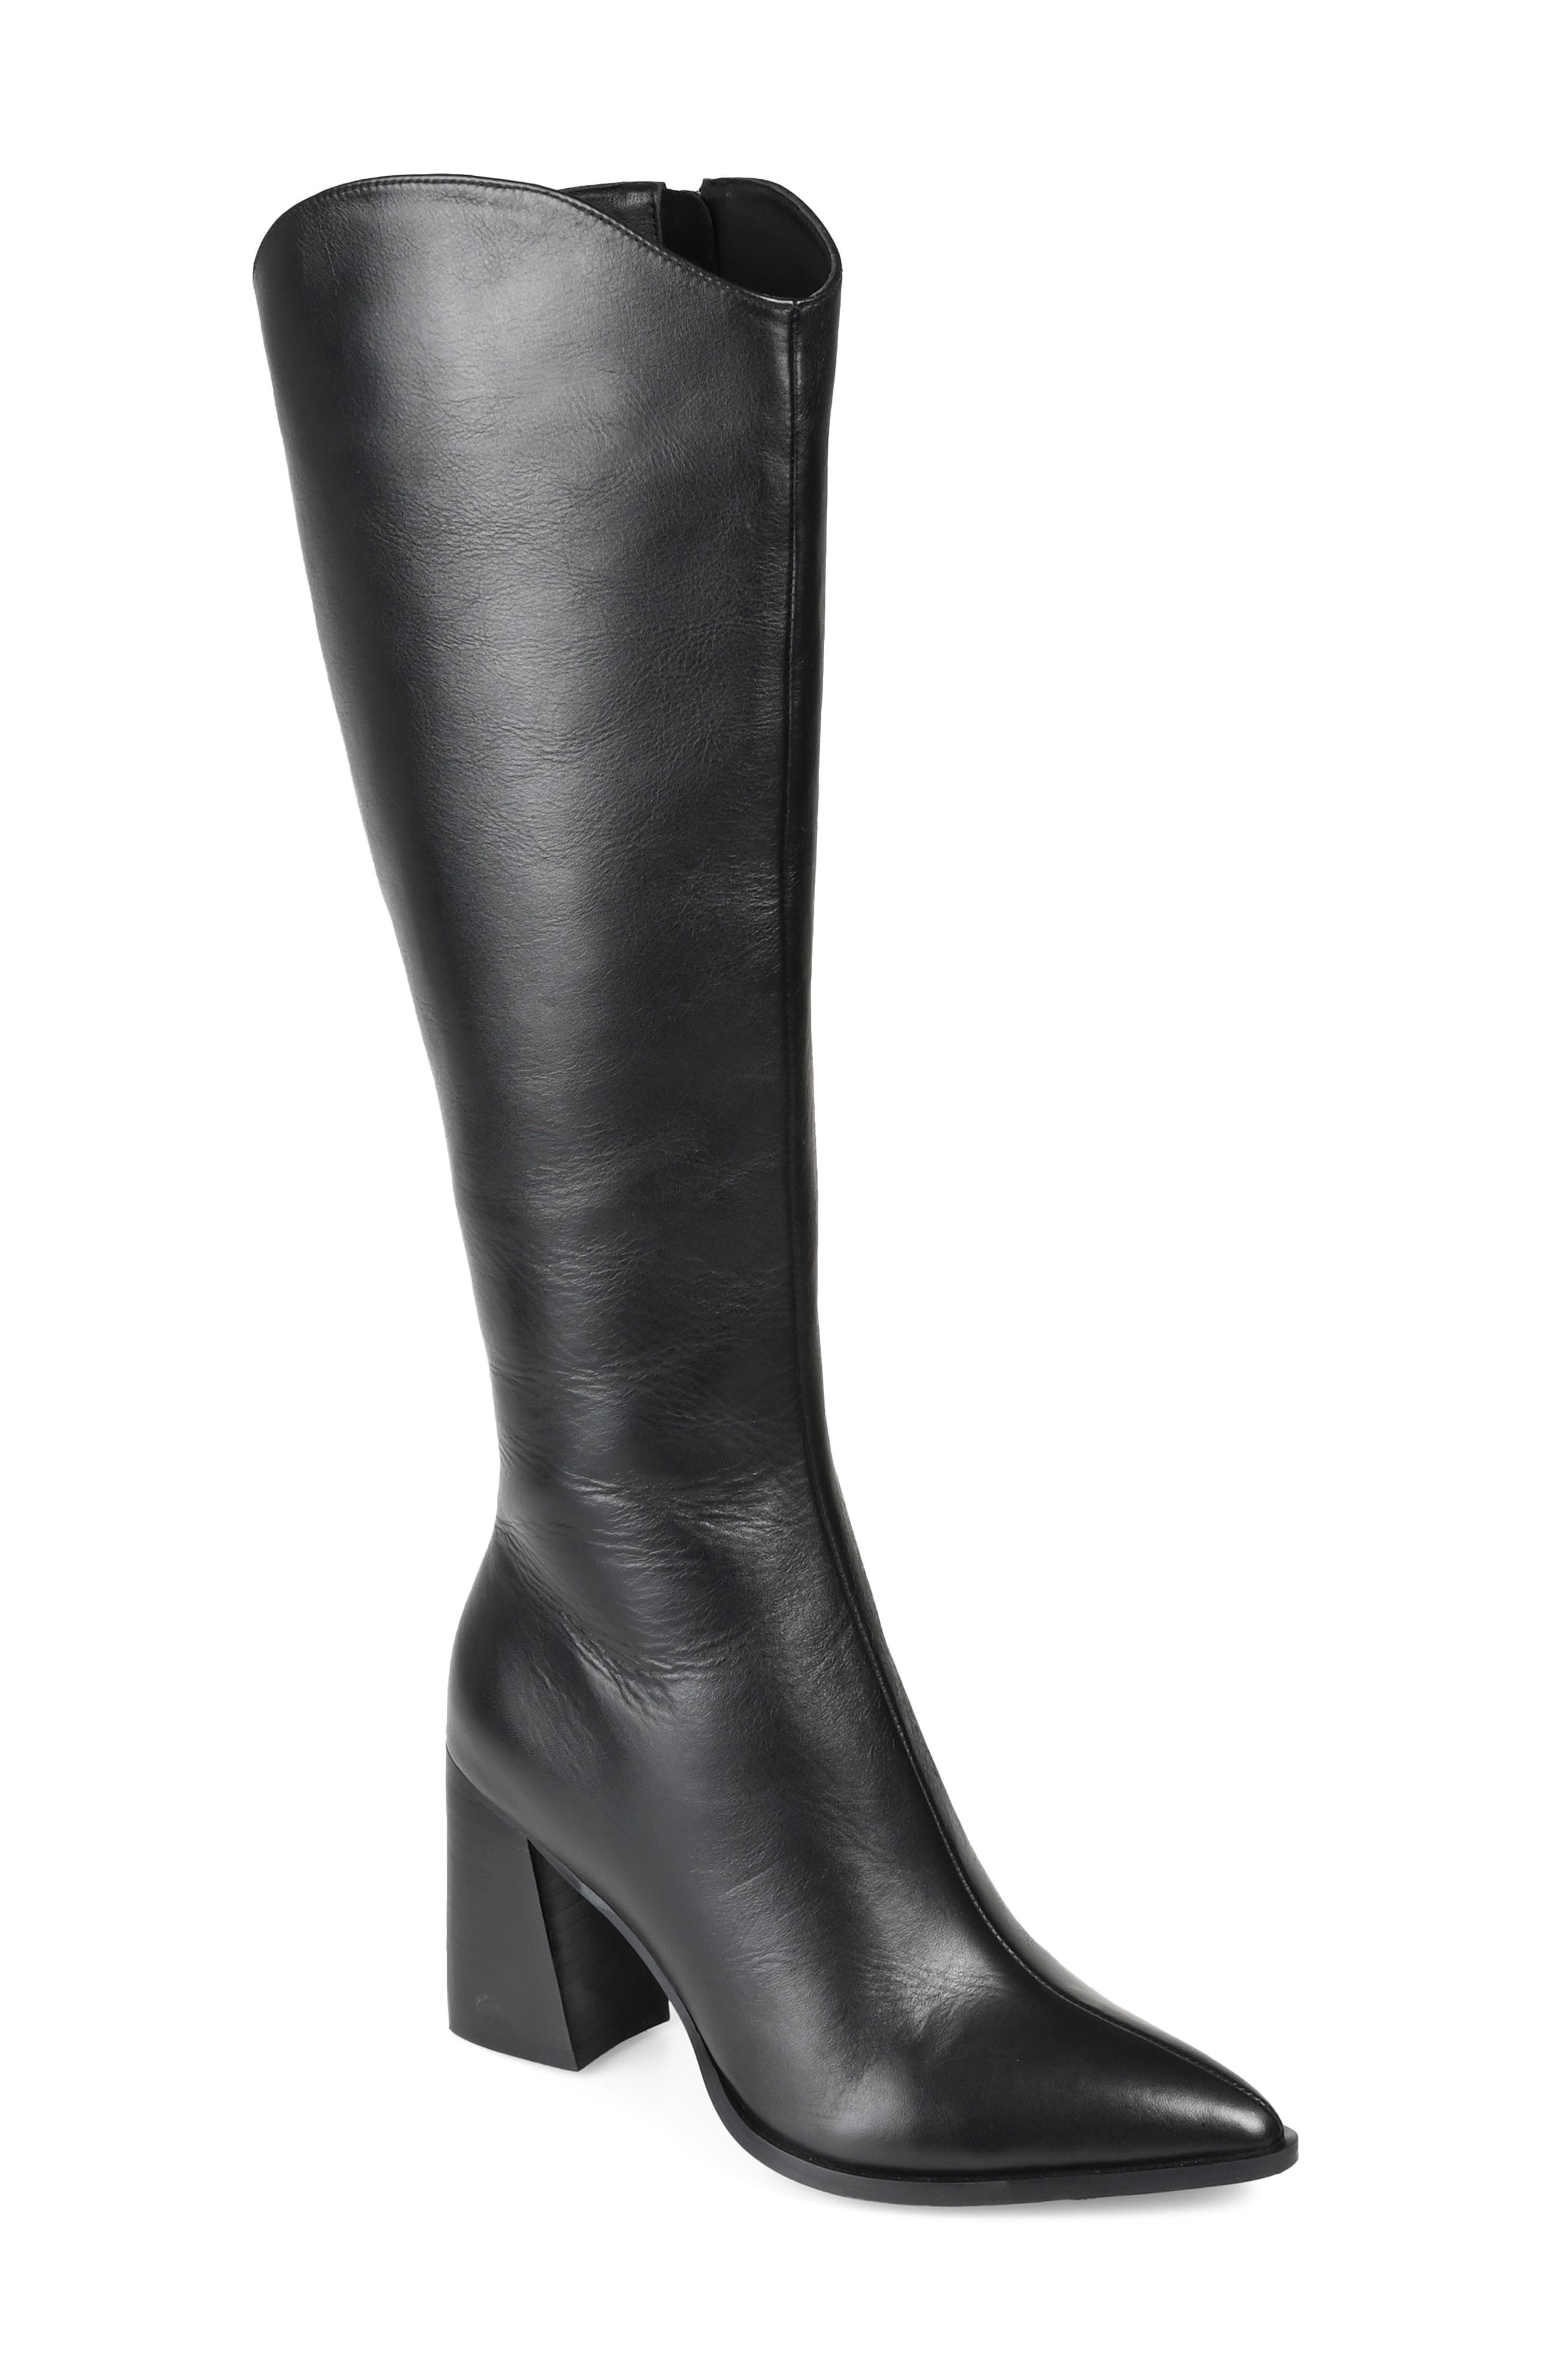 Womens Leather Knee High Boots Ladies Block Heels Wide Calf Riding Shoes Fur Blk 